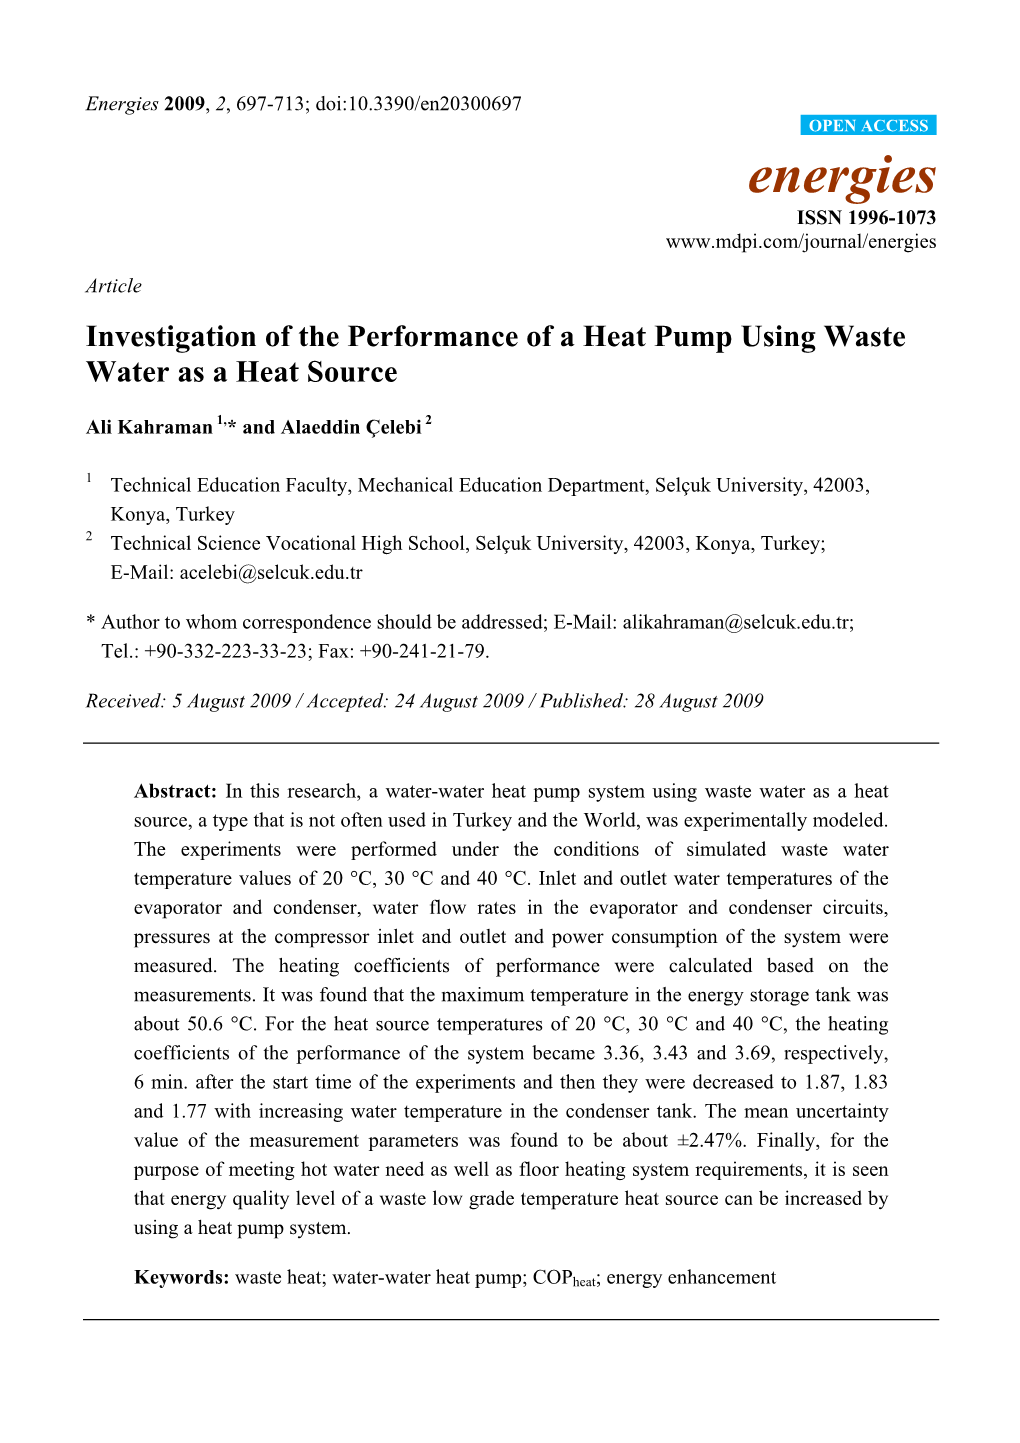 Investigation of the Performance of a Heat Pump Using Waste Water As a Heat Source